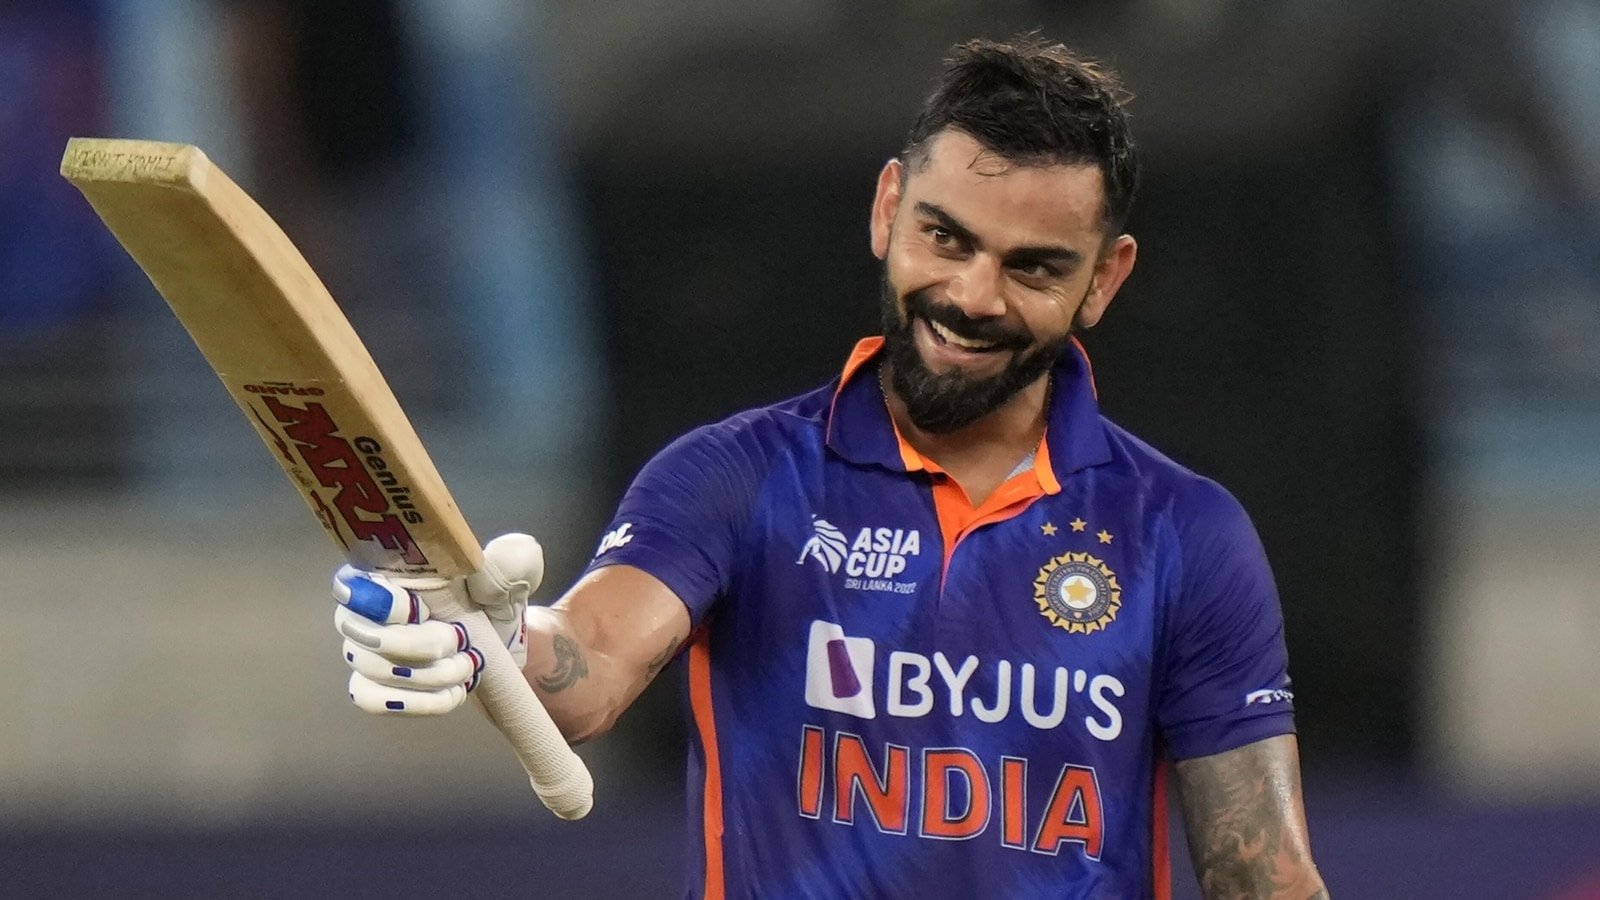 Virat Kohli leaves Rohit Sharma behind to become the highest run-scorer in T20Is